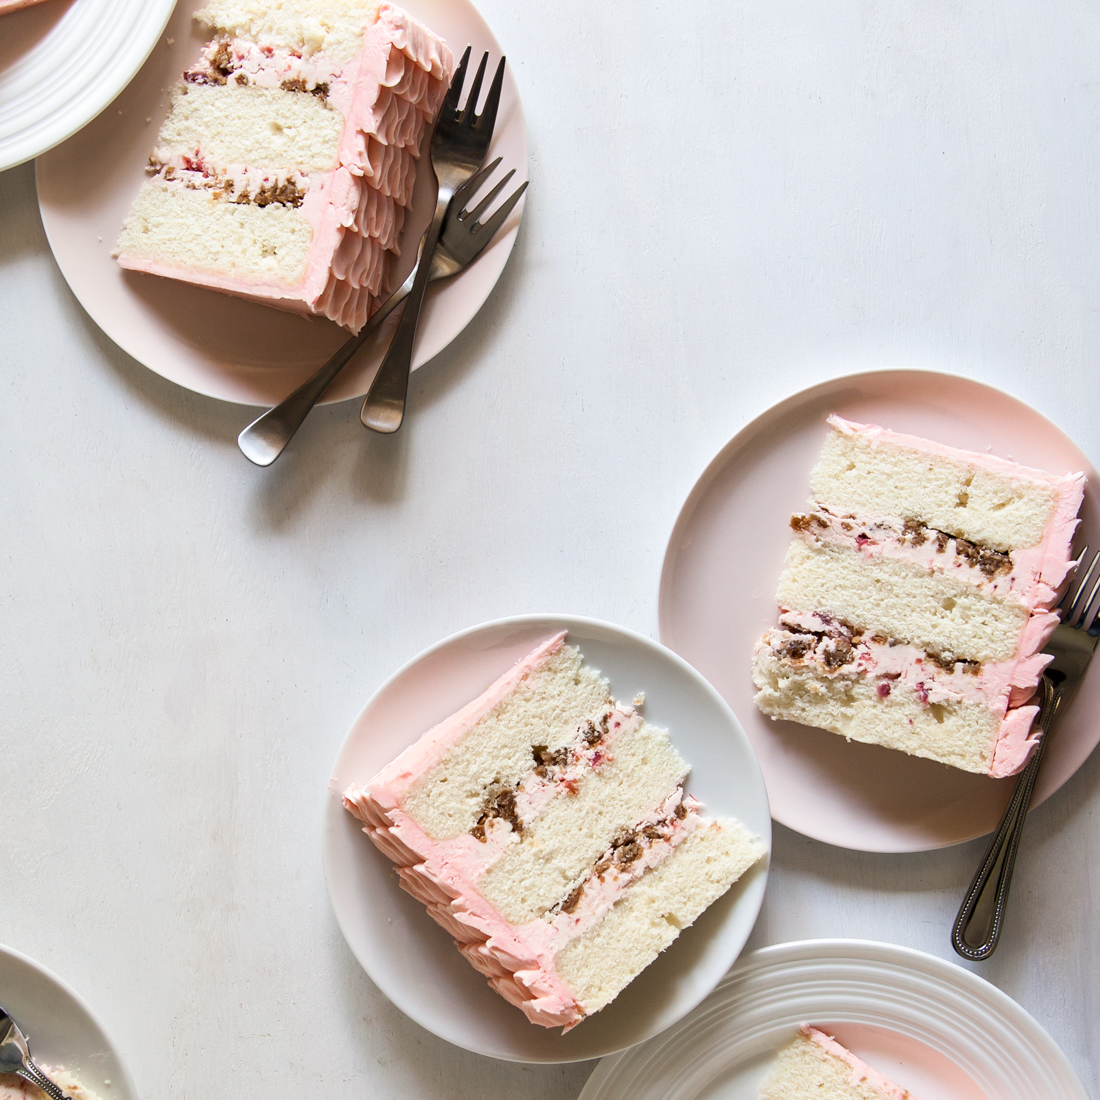 Riesling Rhubarb Crisp Cake Slices from "Layered."